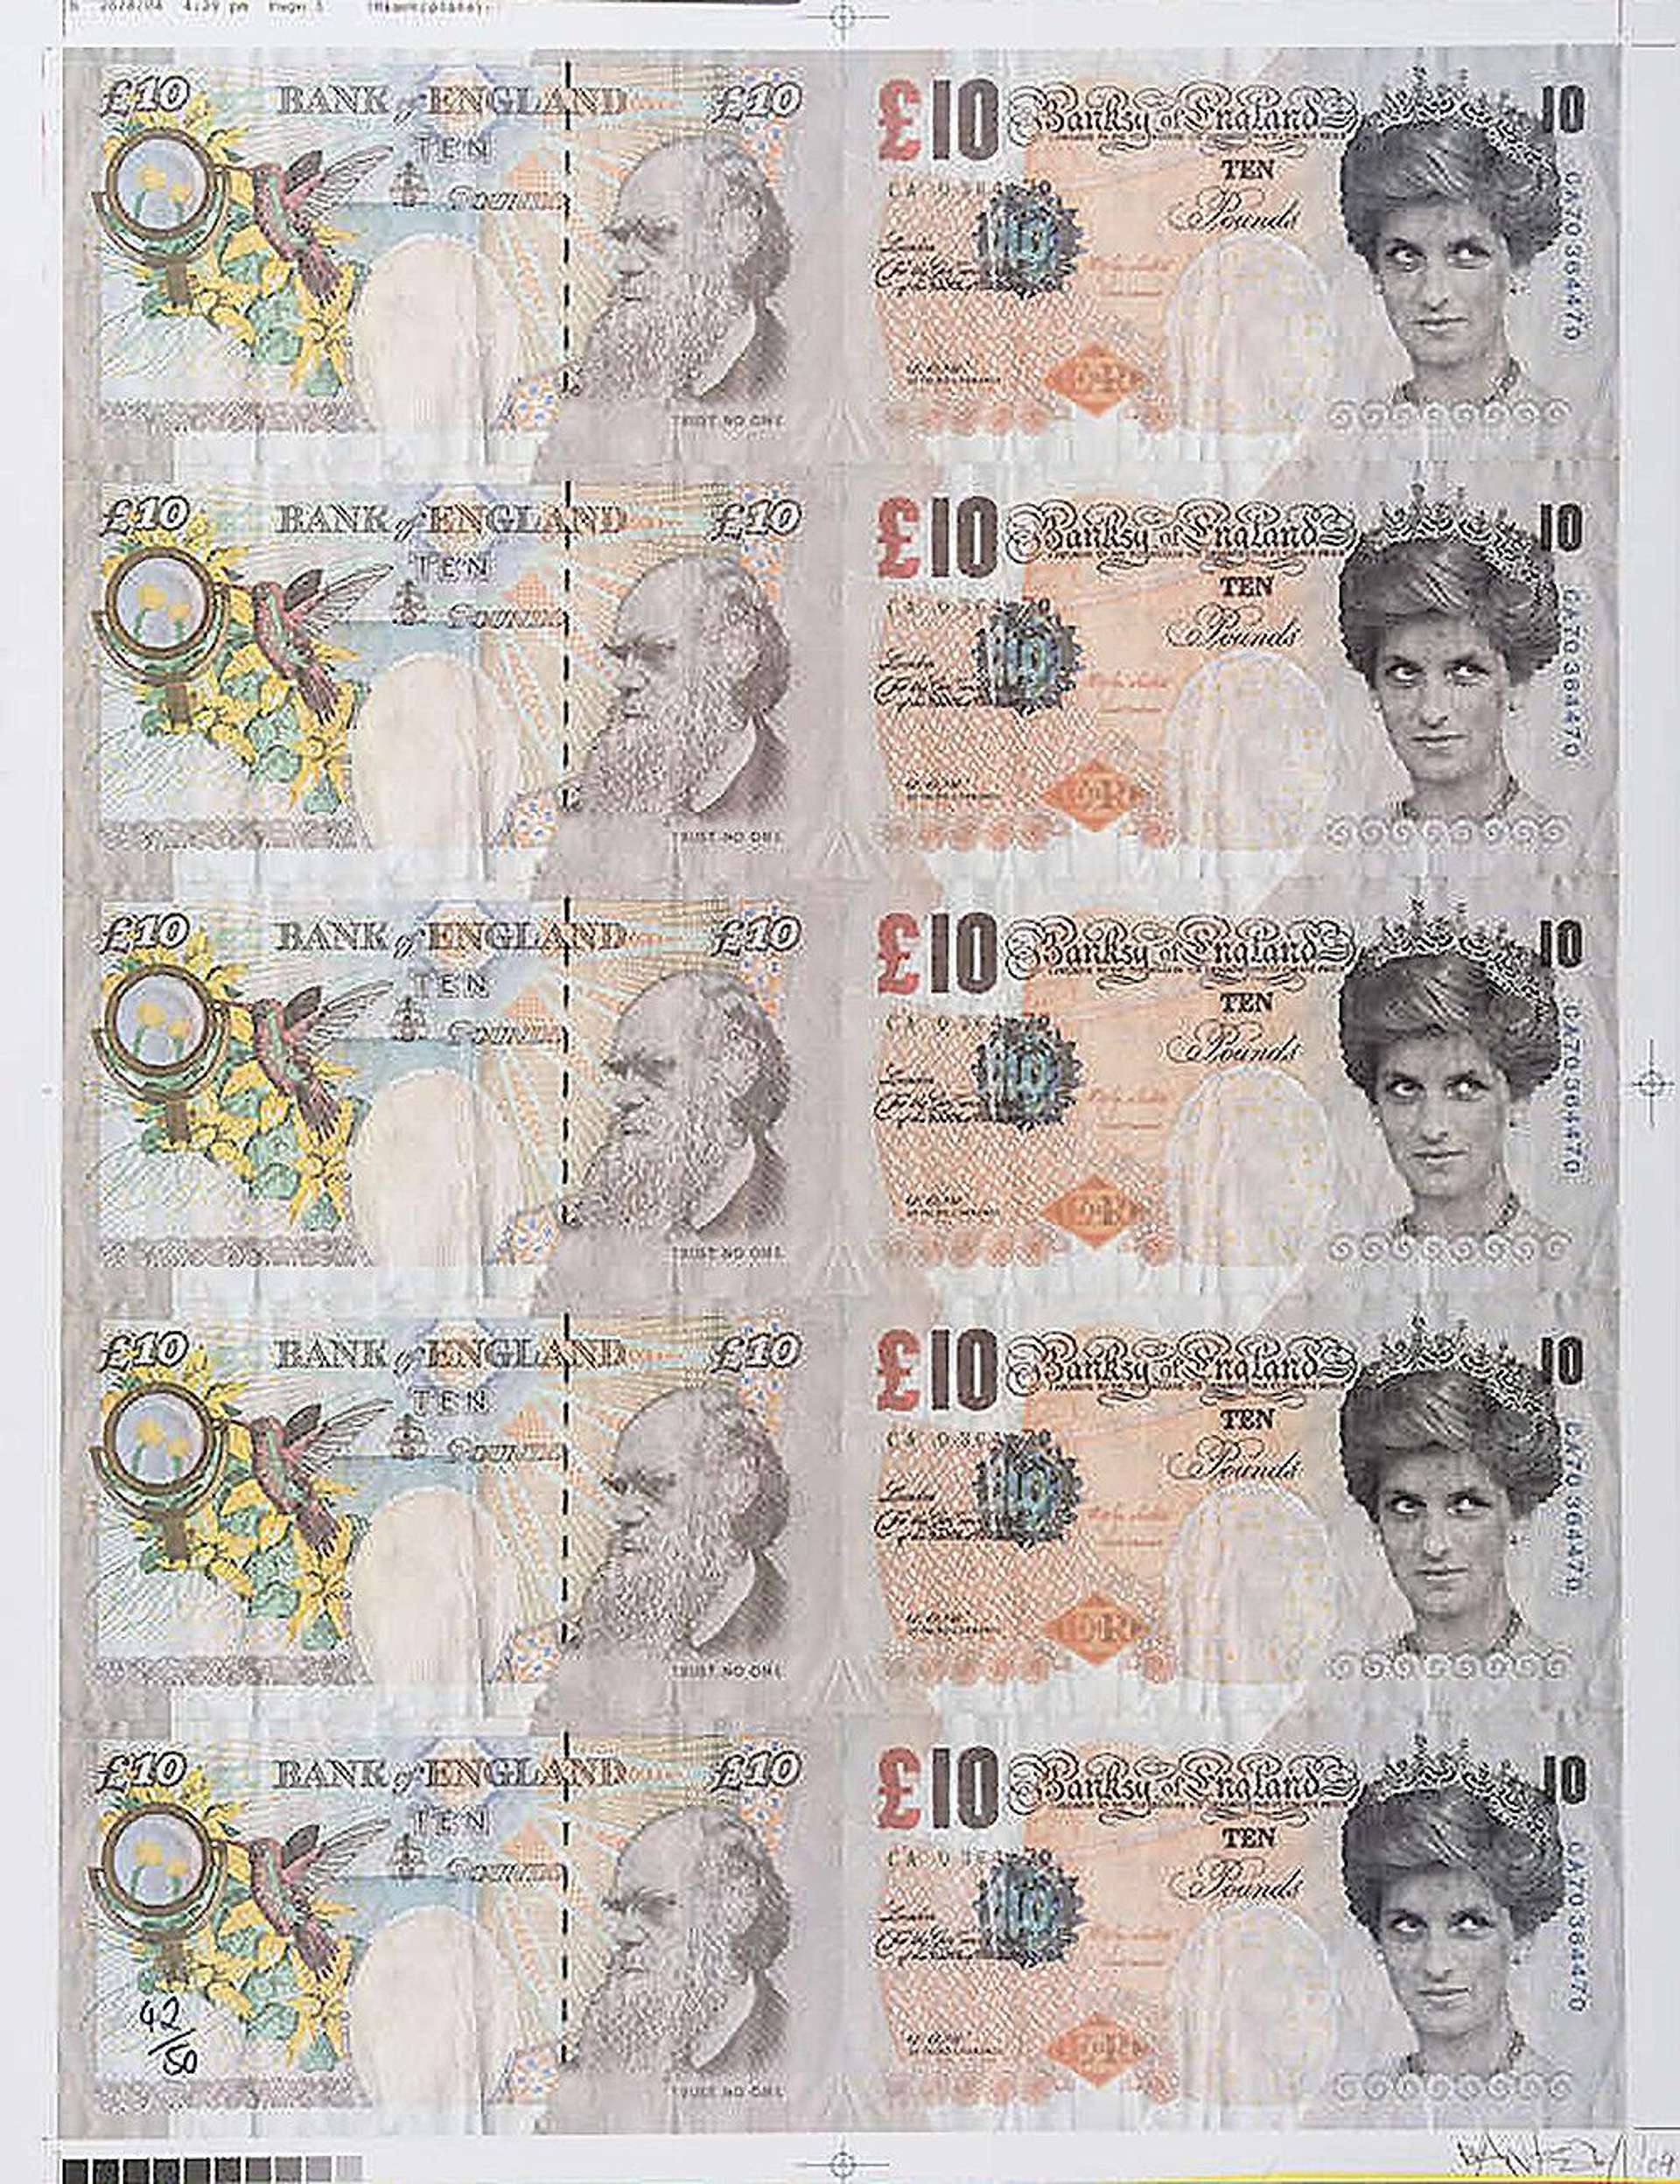 Two columns each with five GBP ten pound notes - the left column showing Charles Darwin and the right column showing Princess Diana instead of the Queen